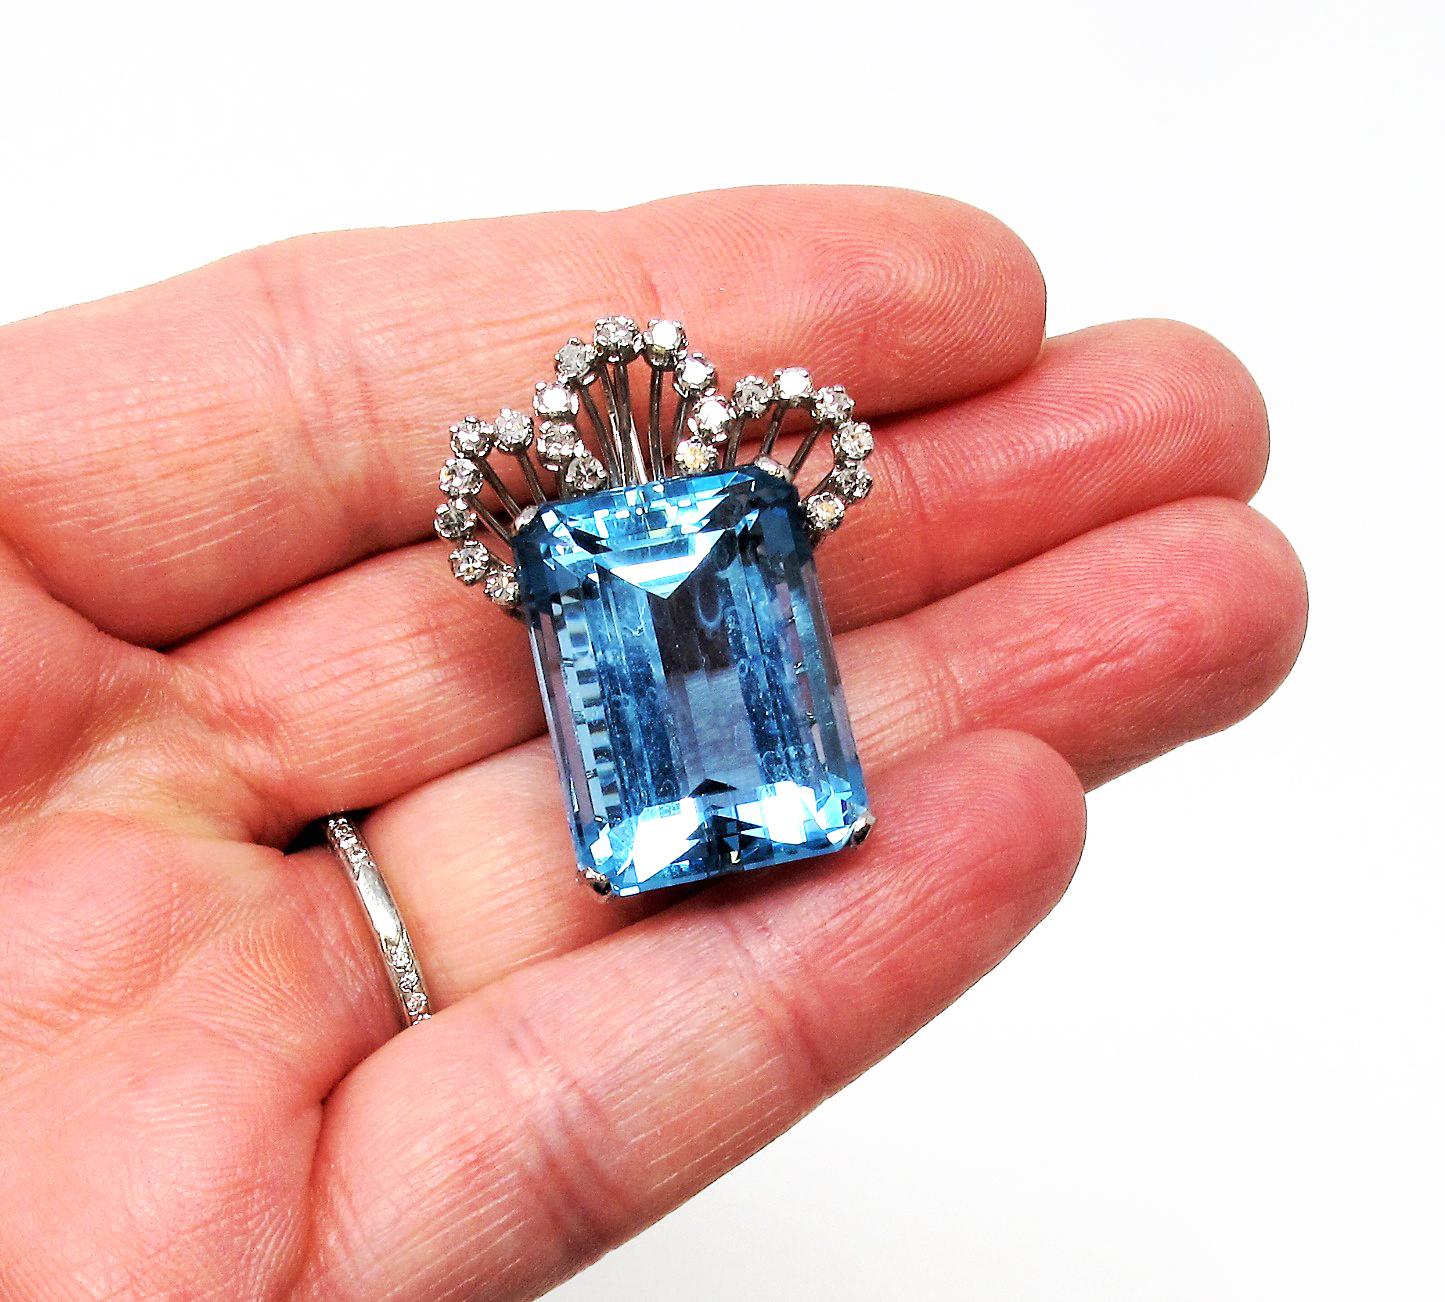 Absolutely breathtaking aquamarine and diamond brooch / pendant. This incredible piece features a fairly simple design, yet is so incredibly special. The bright, crystal blue color of the stunning aquamarine pops against the icy white diamonds and